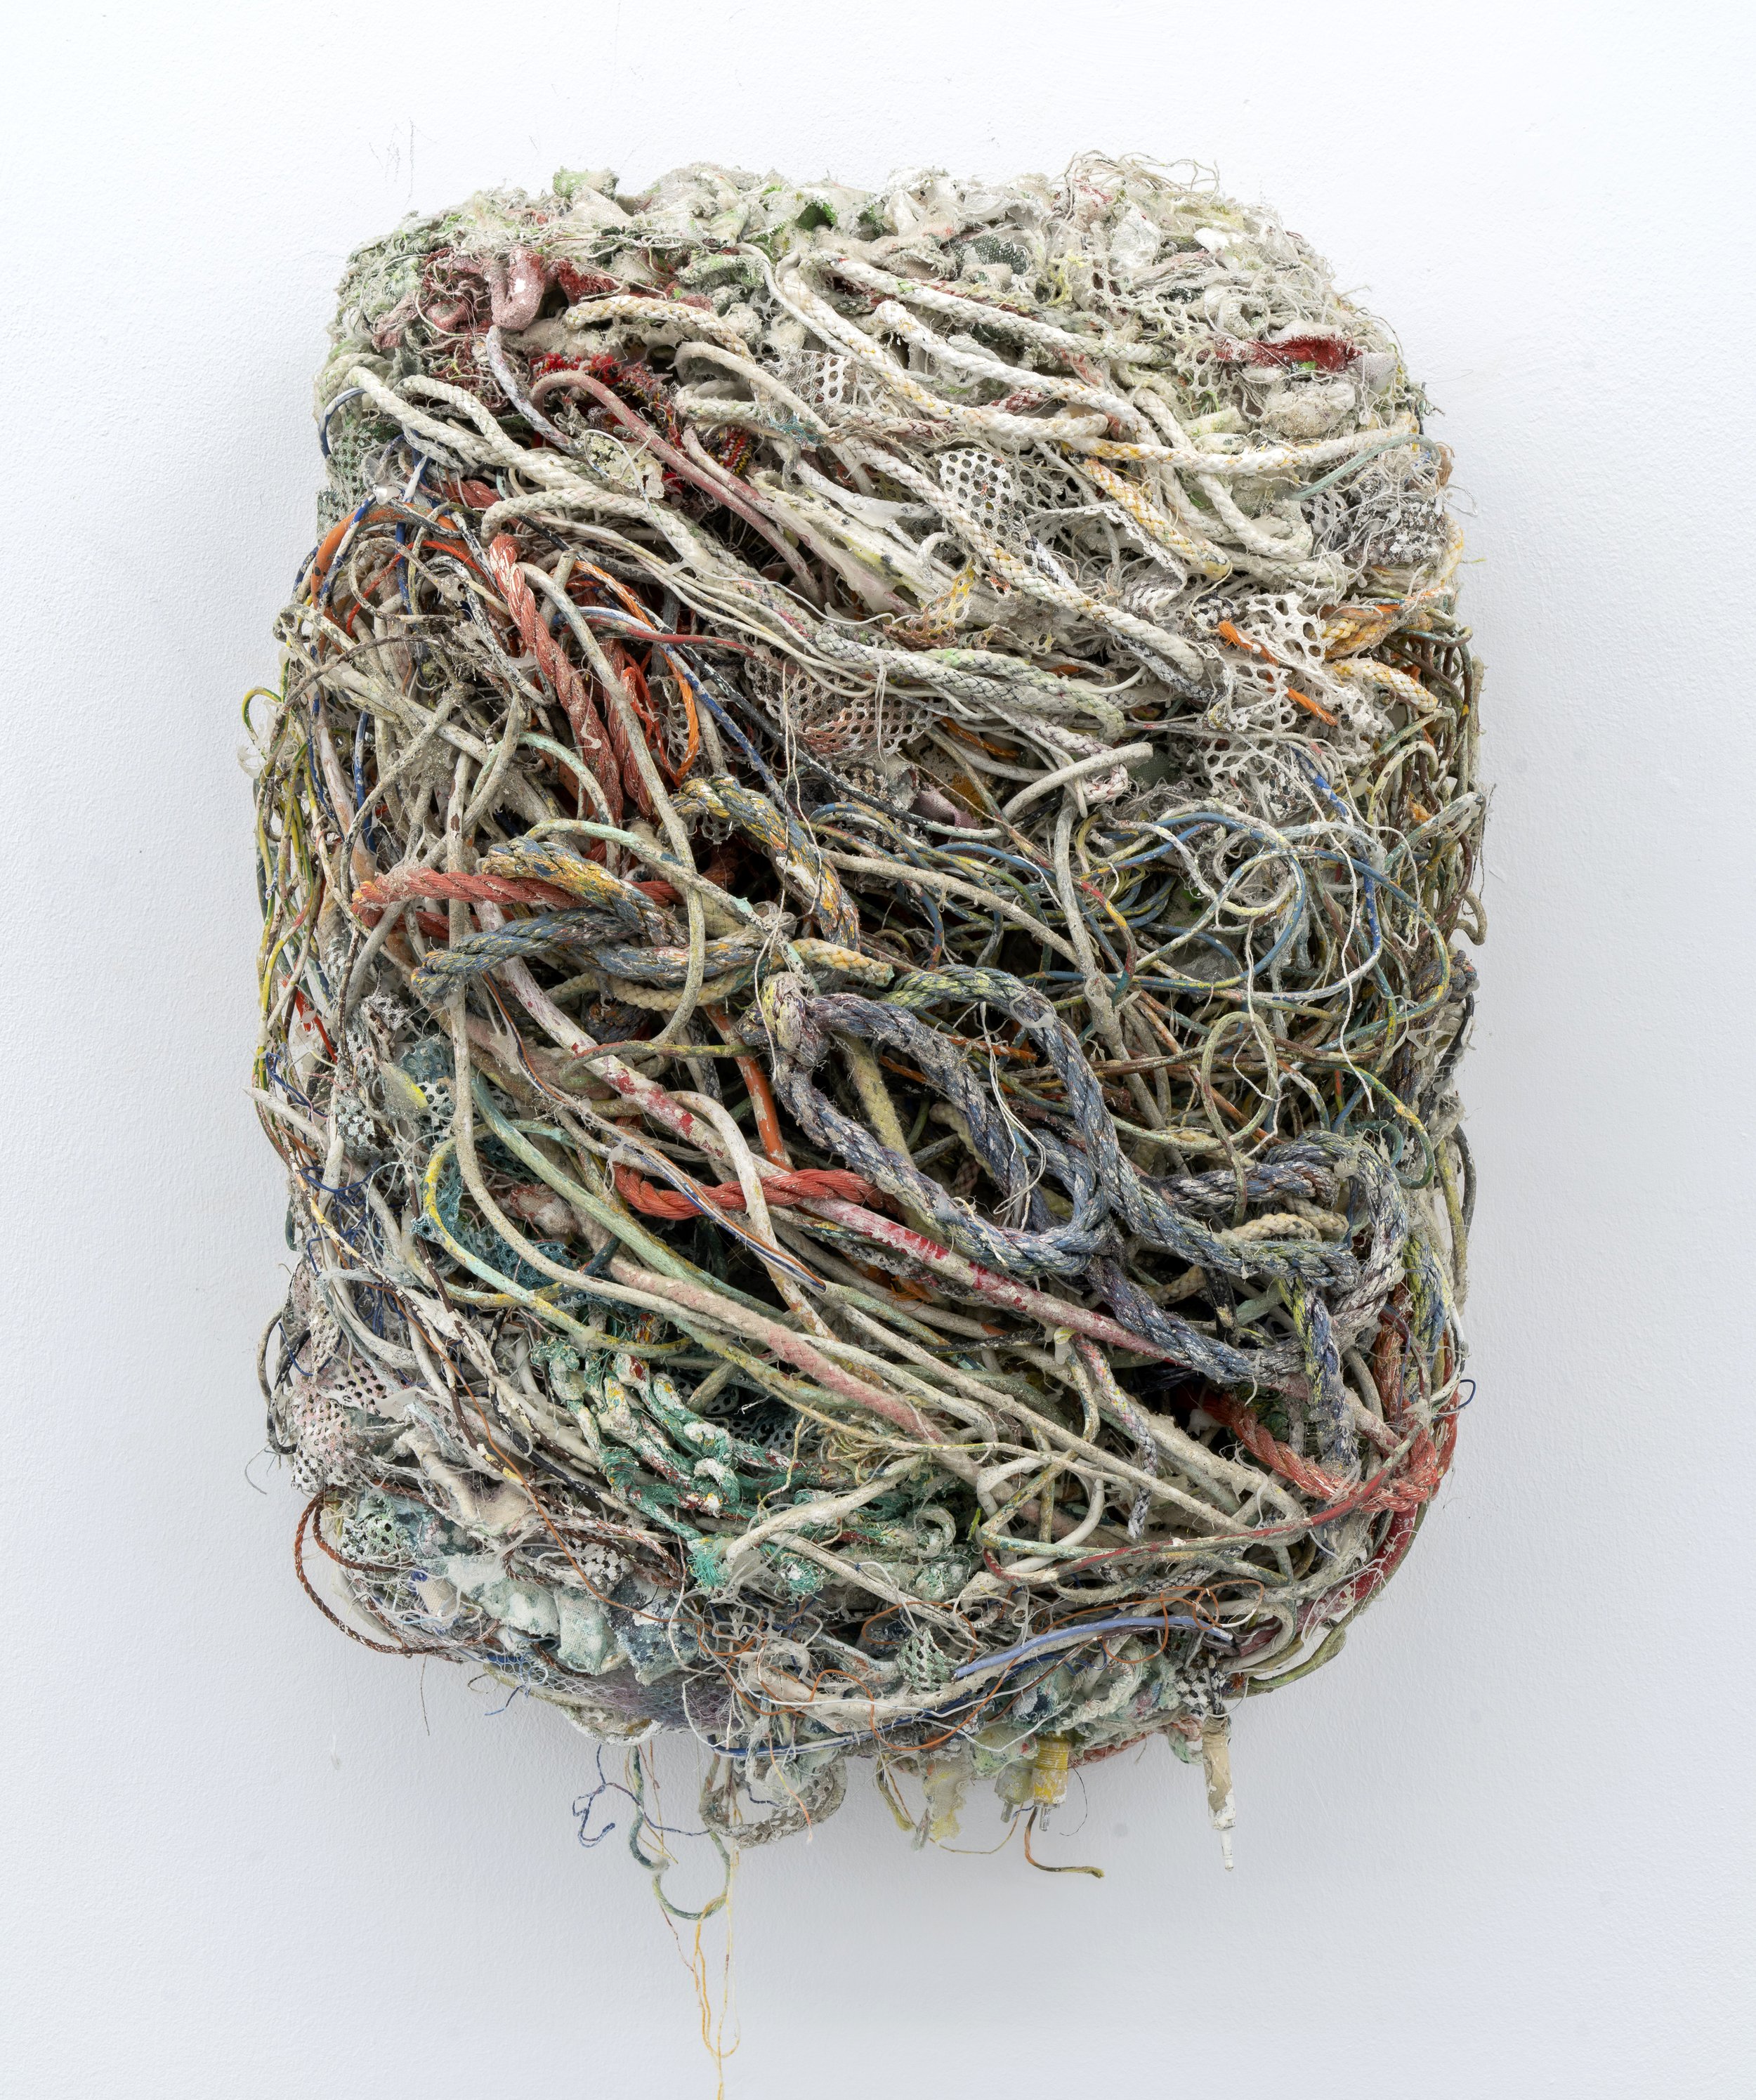   Entanglement   60 x 45 cm   Recovered electrical wires, fishing nets, ropes and studio detritus, bound to bedsprings  Part of the  You Turn Me Inside Out  solo exhibition at Fold Gallery, London 2022 